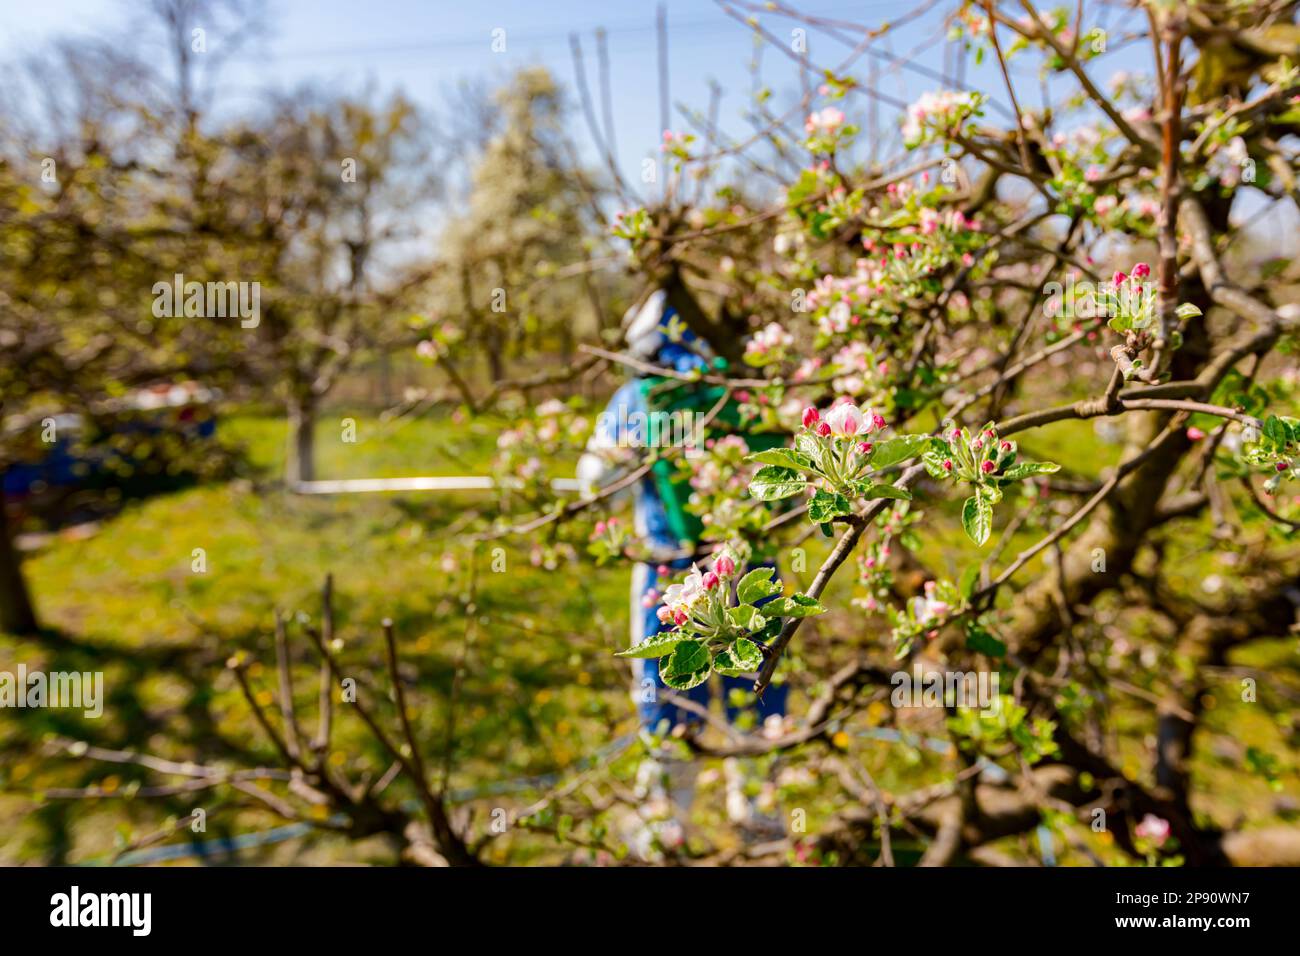 Young blossom buds with pink and white petals on the branch of apple tree in orchard at early spring, in the background farmer in protective clothes s Stock Photo